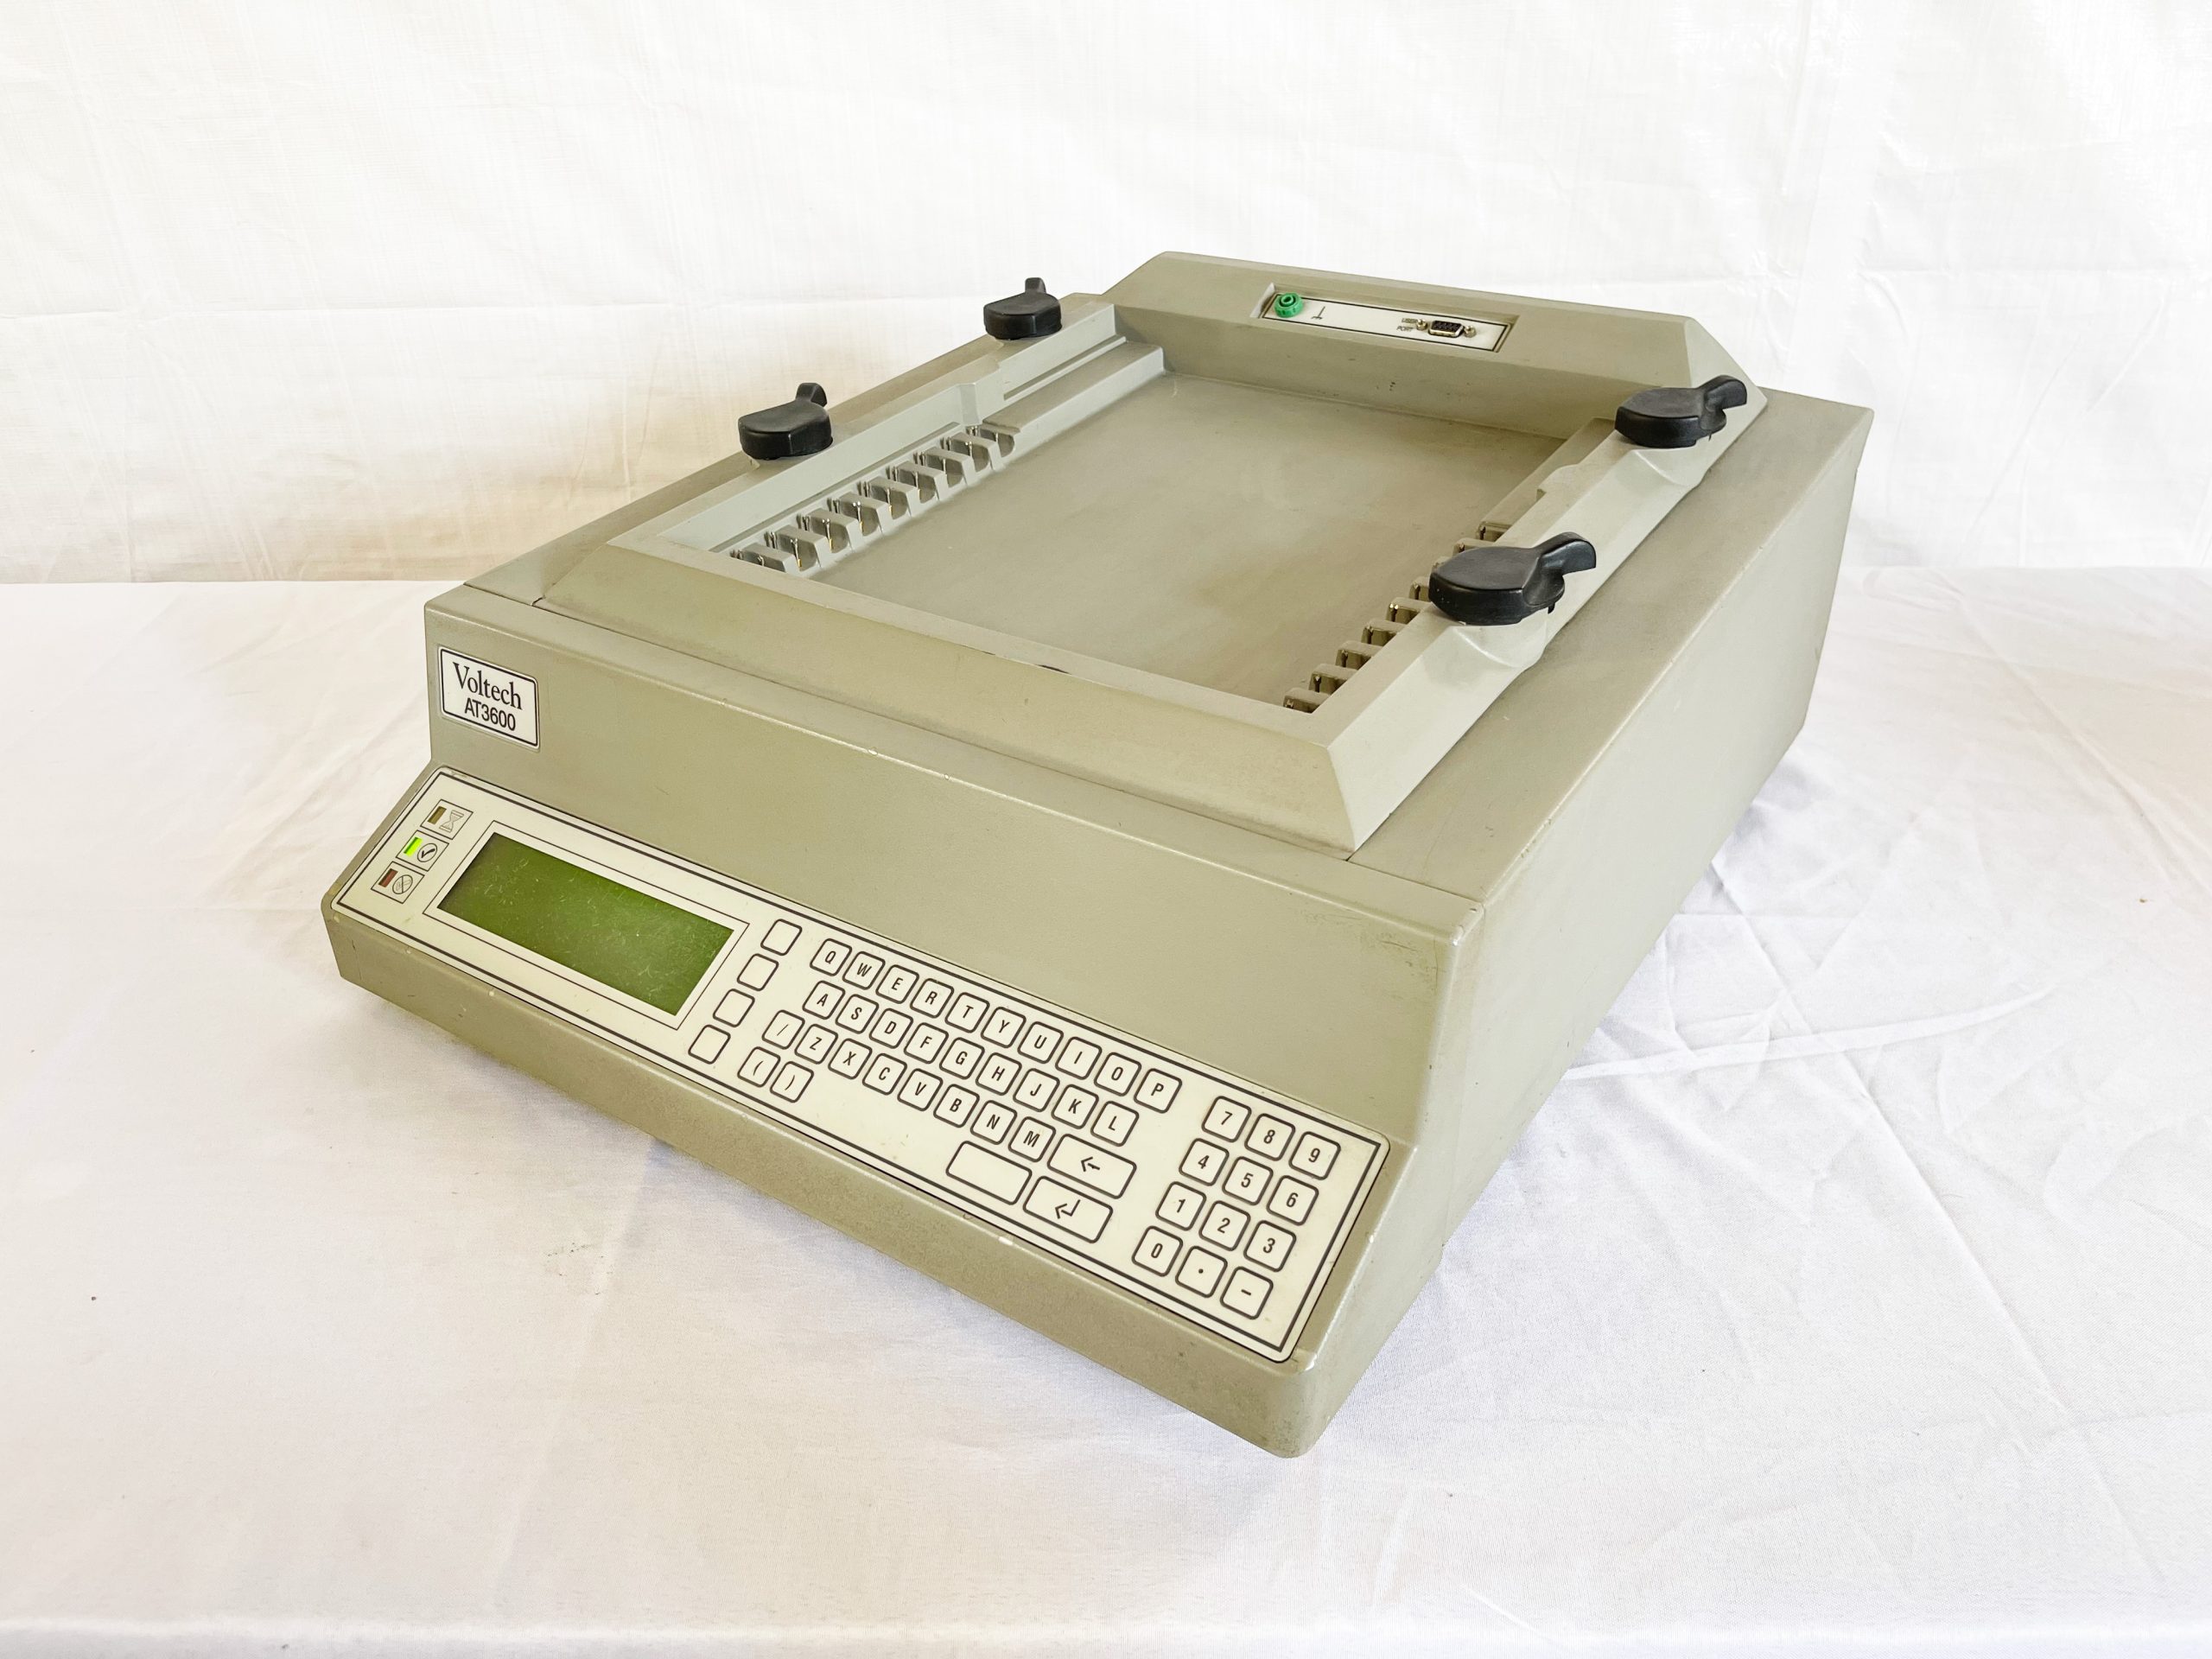 Buy Online Voltech AT 3600 Automatic Transformer Tester -67076